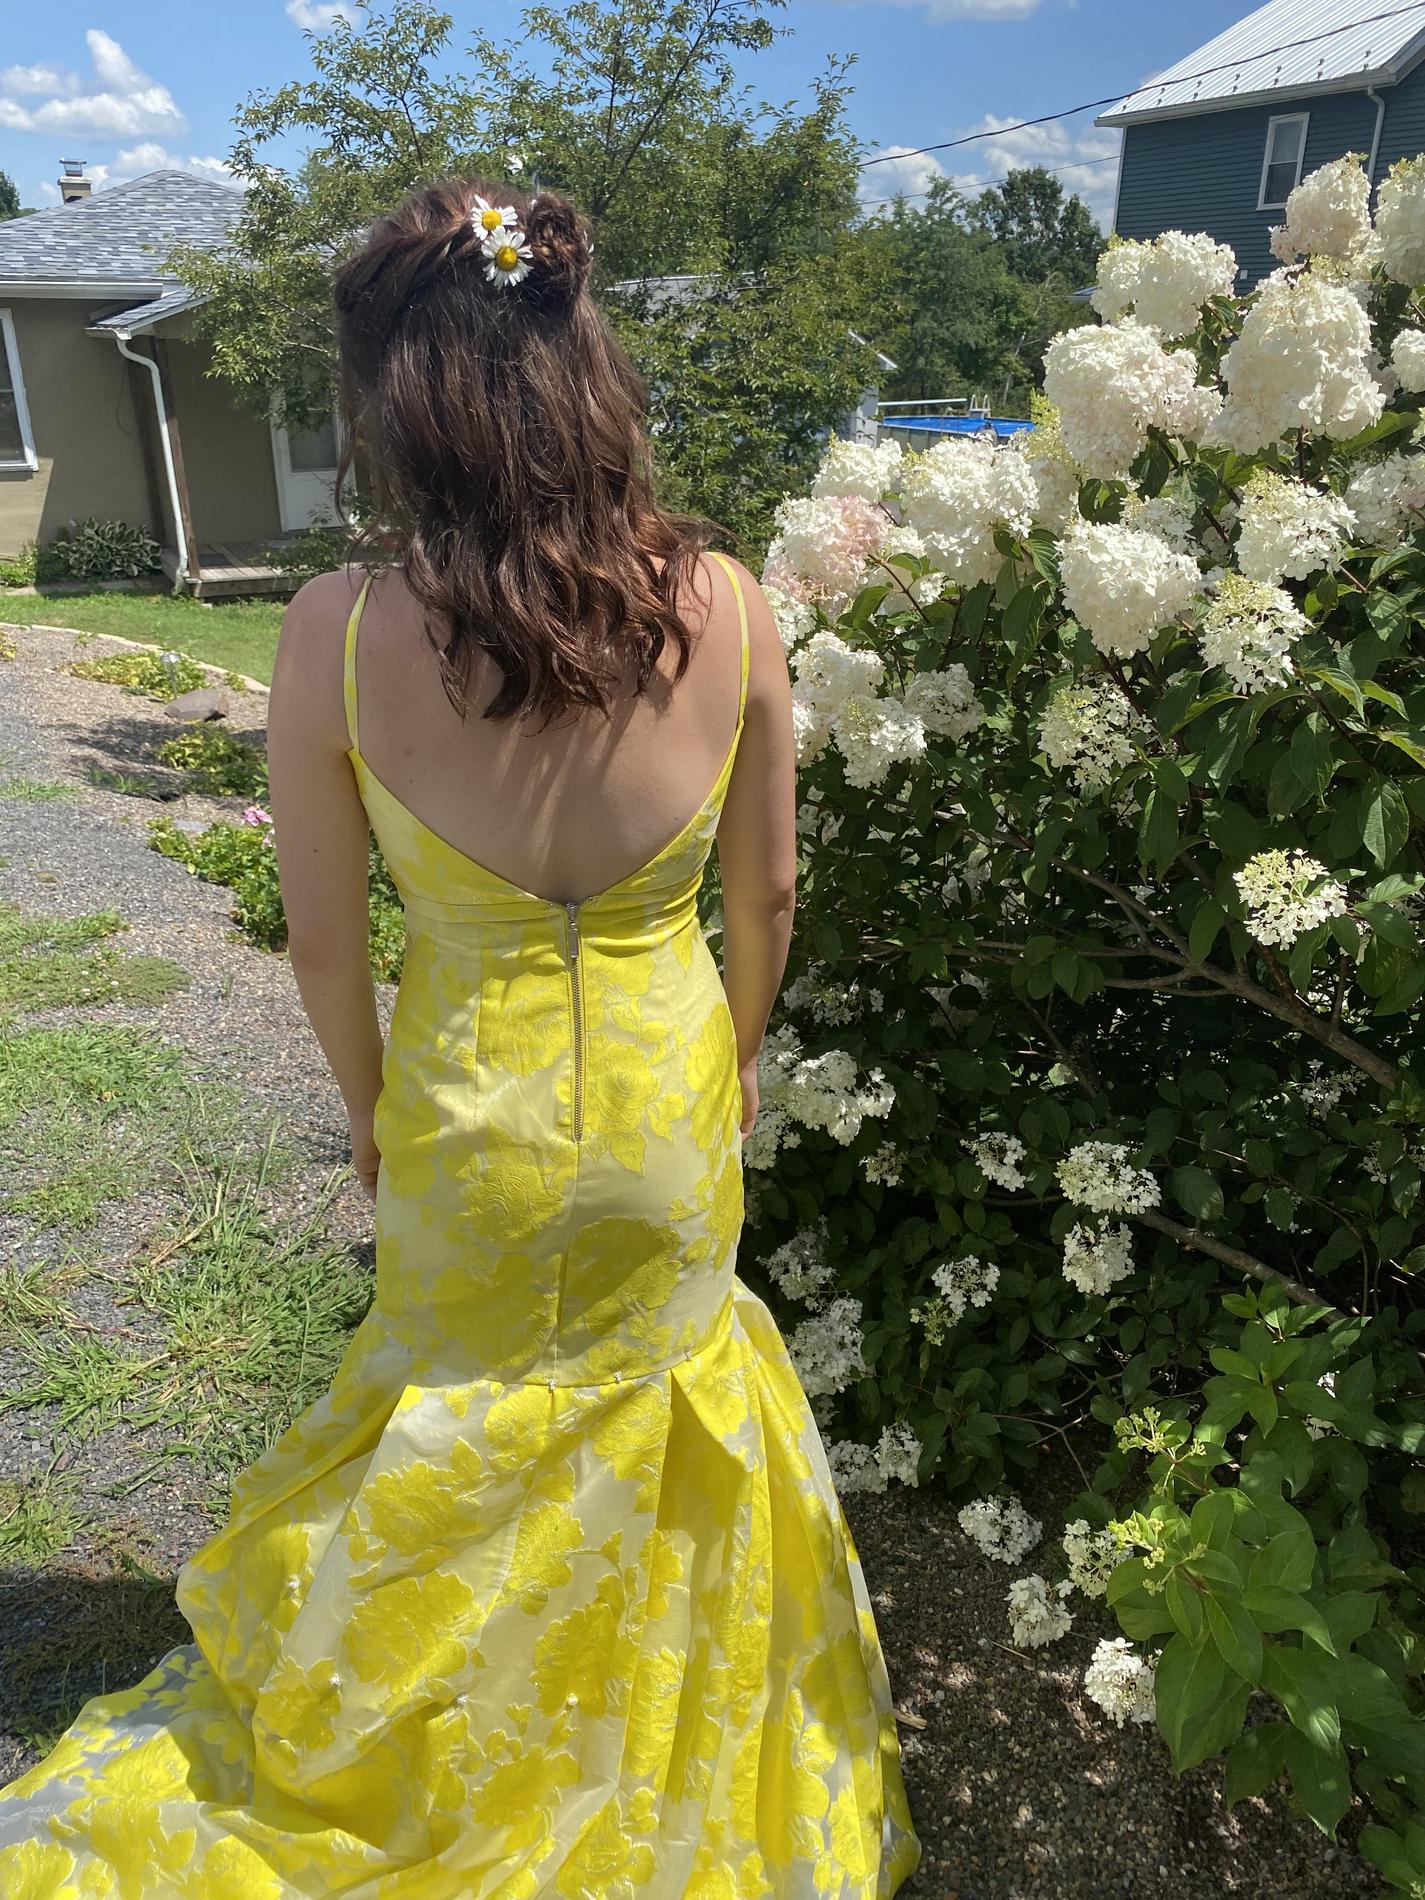 Yellow Size 4 Mermaid Dress on Queenly